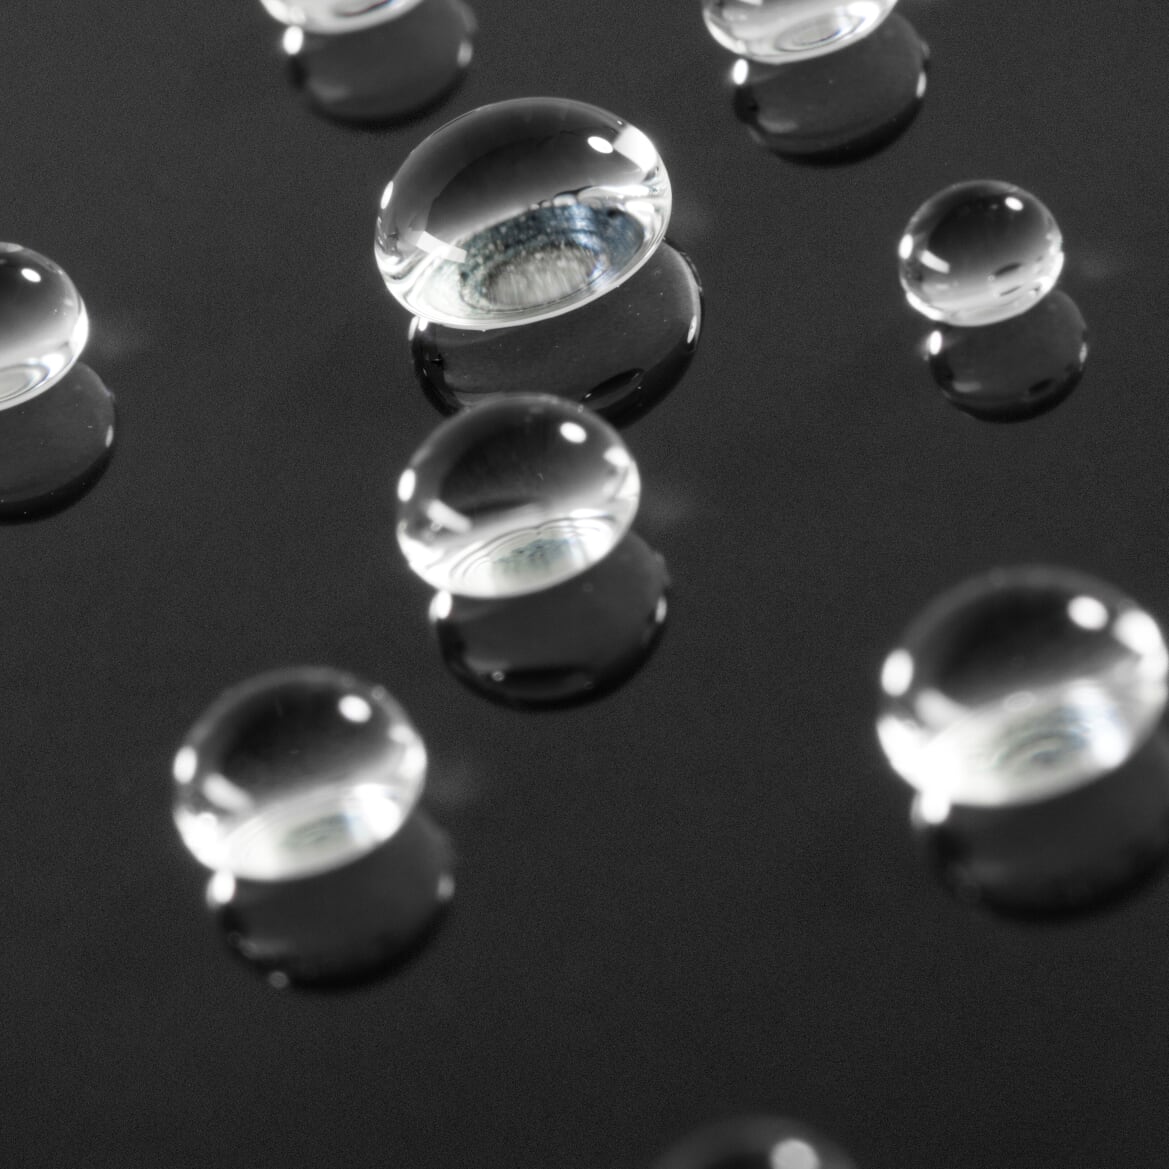 A new milestone in superhydrophobic and resistant coatings